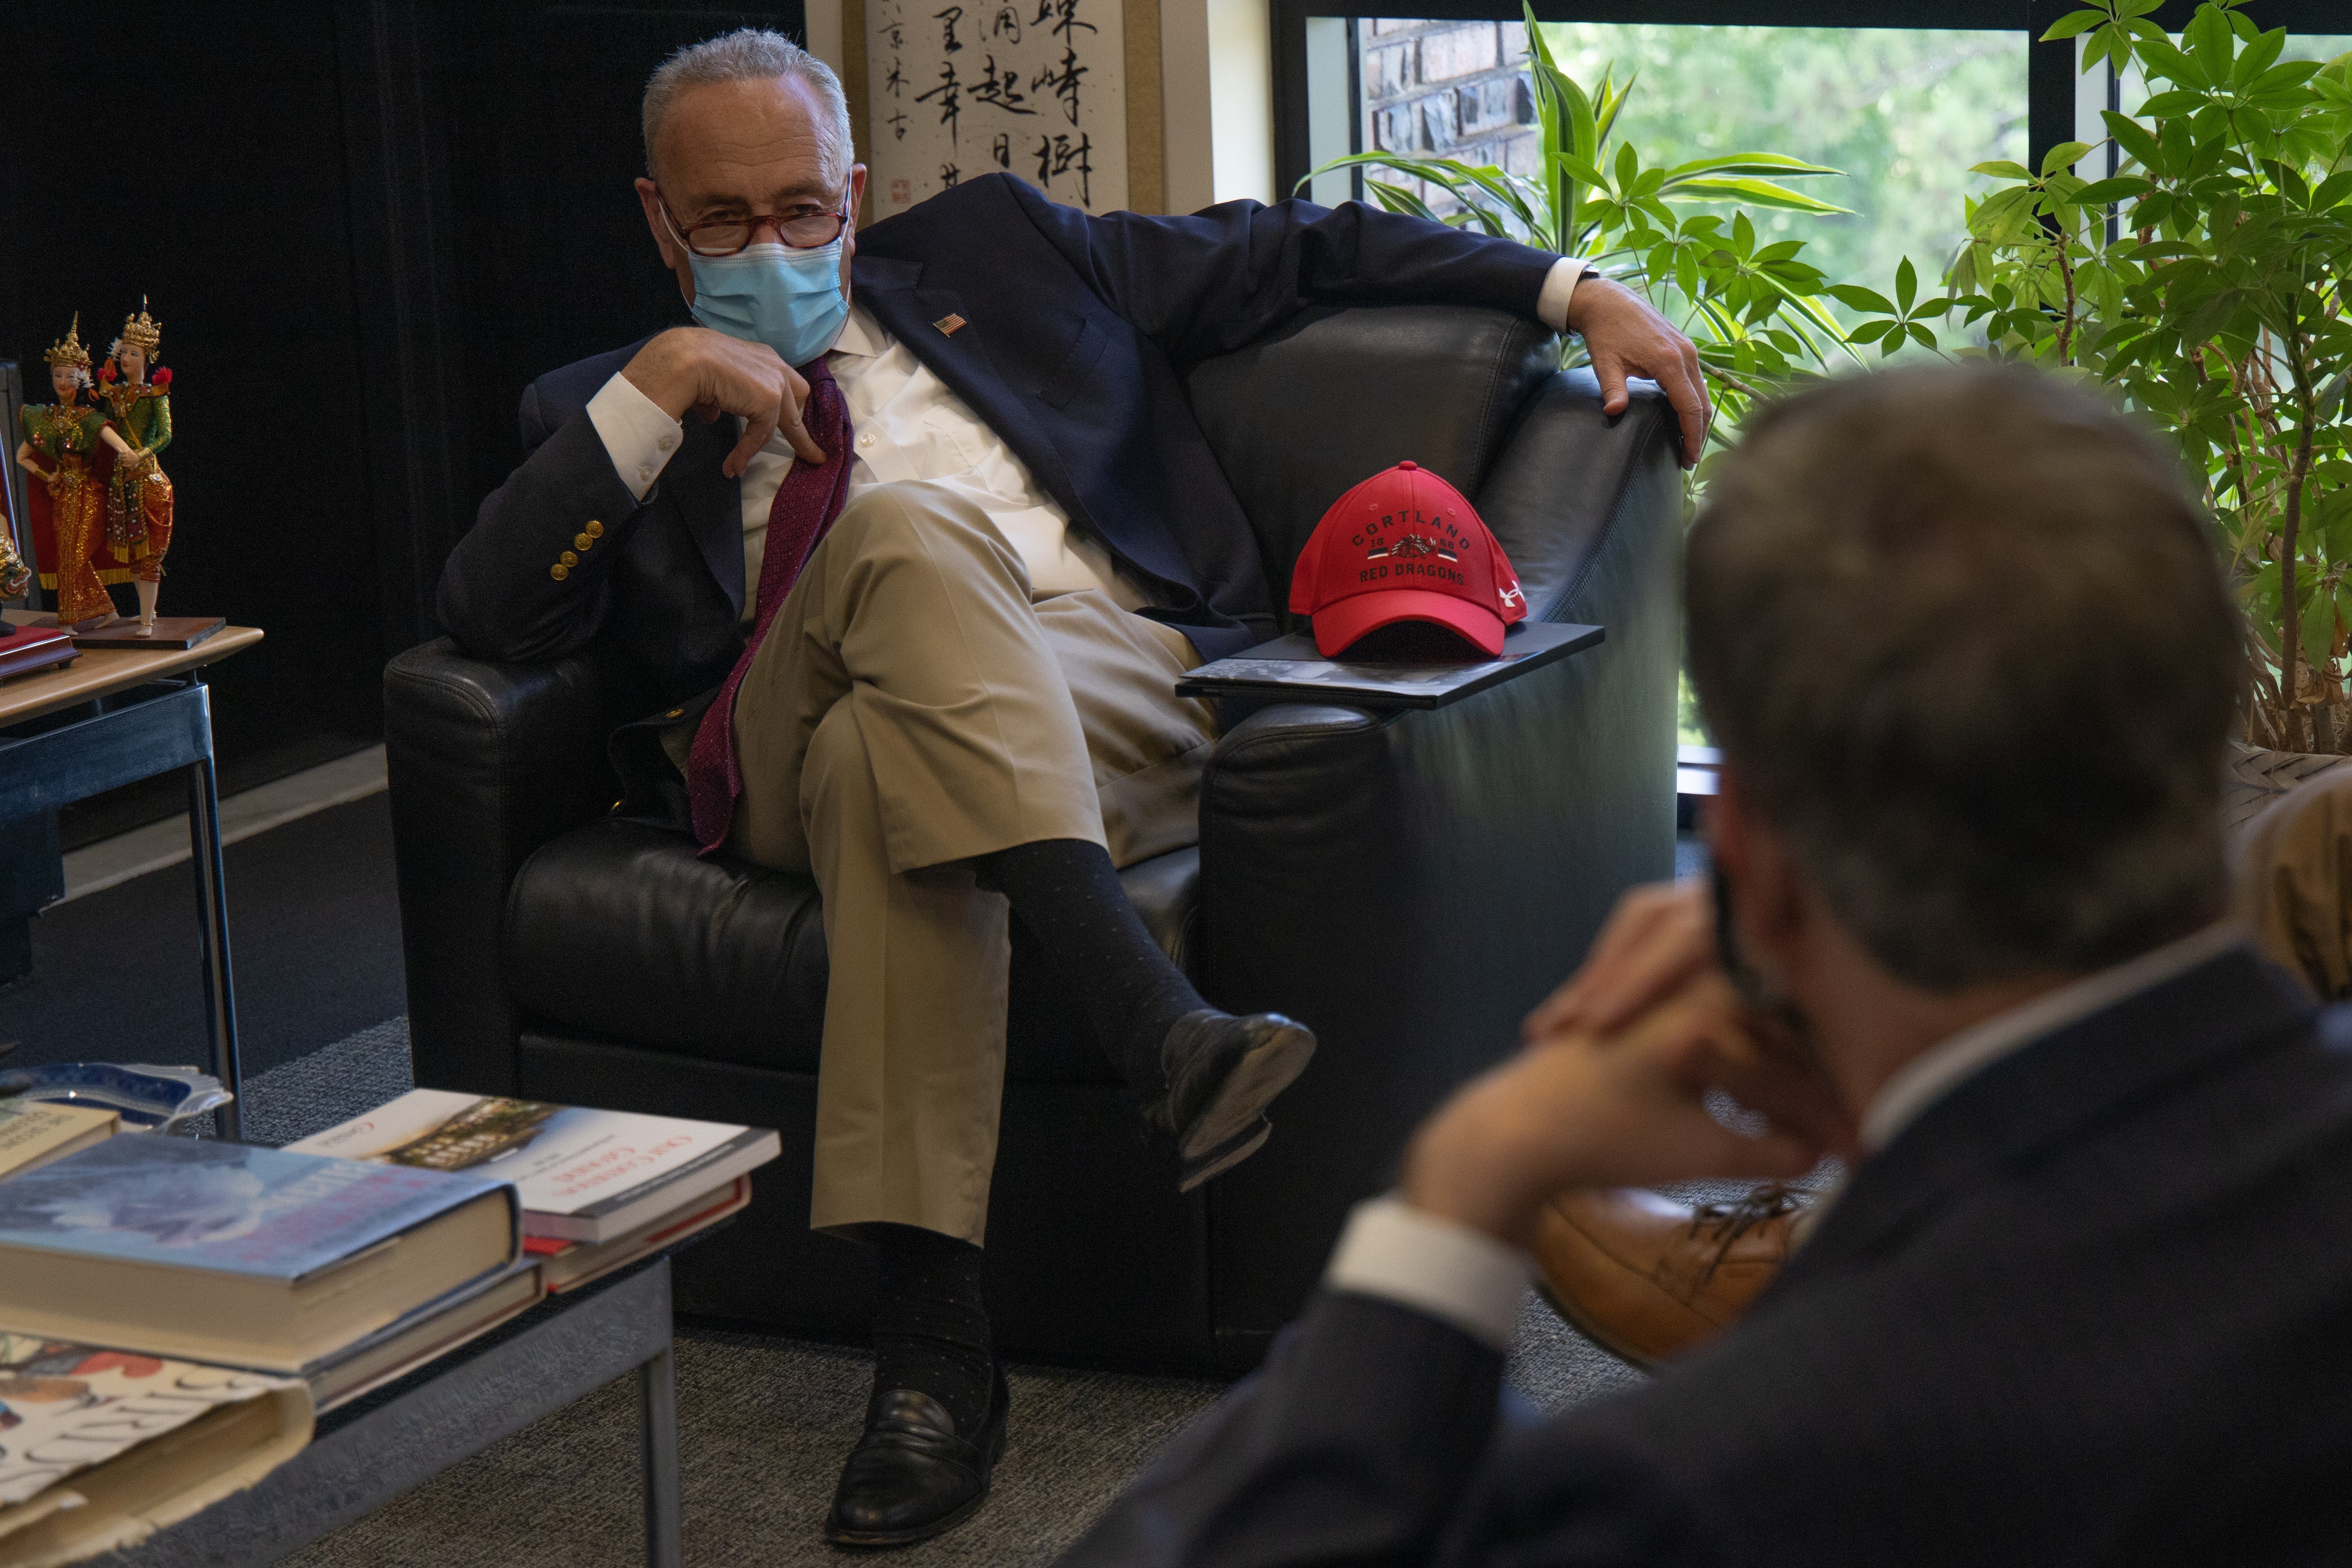 Senator Schumer visits SUNY Cortland to discuss federal stimulus aid with president and provost